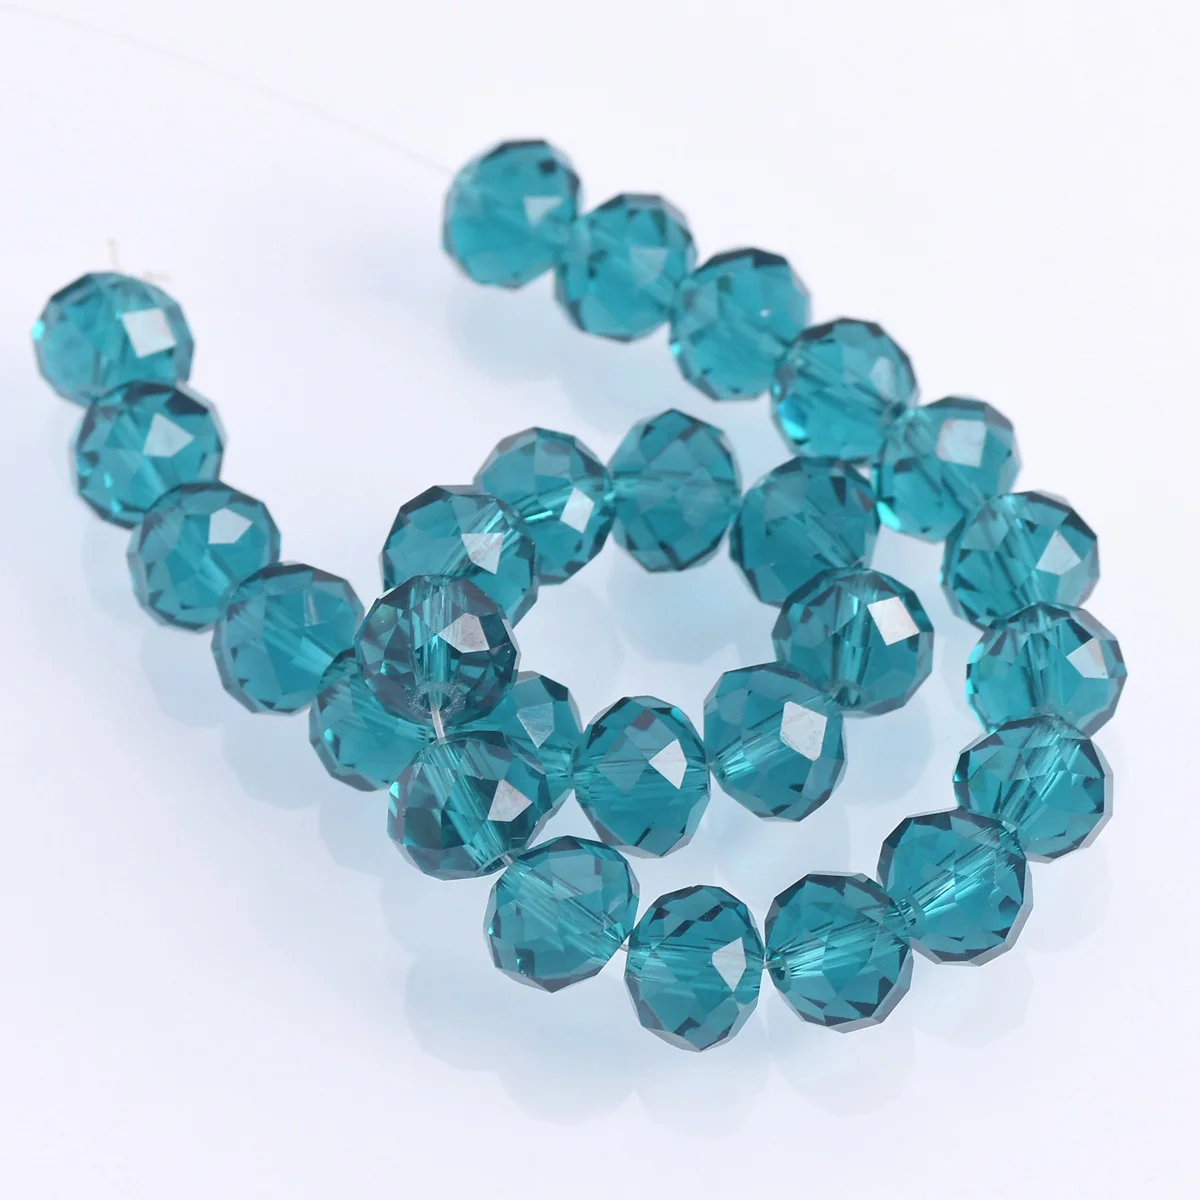 Large Hole Glass Beads, 6mm X 9mm Rondelle Roller With 3mm Hole, Green  Copper-lined, 10 Pieces 